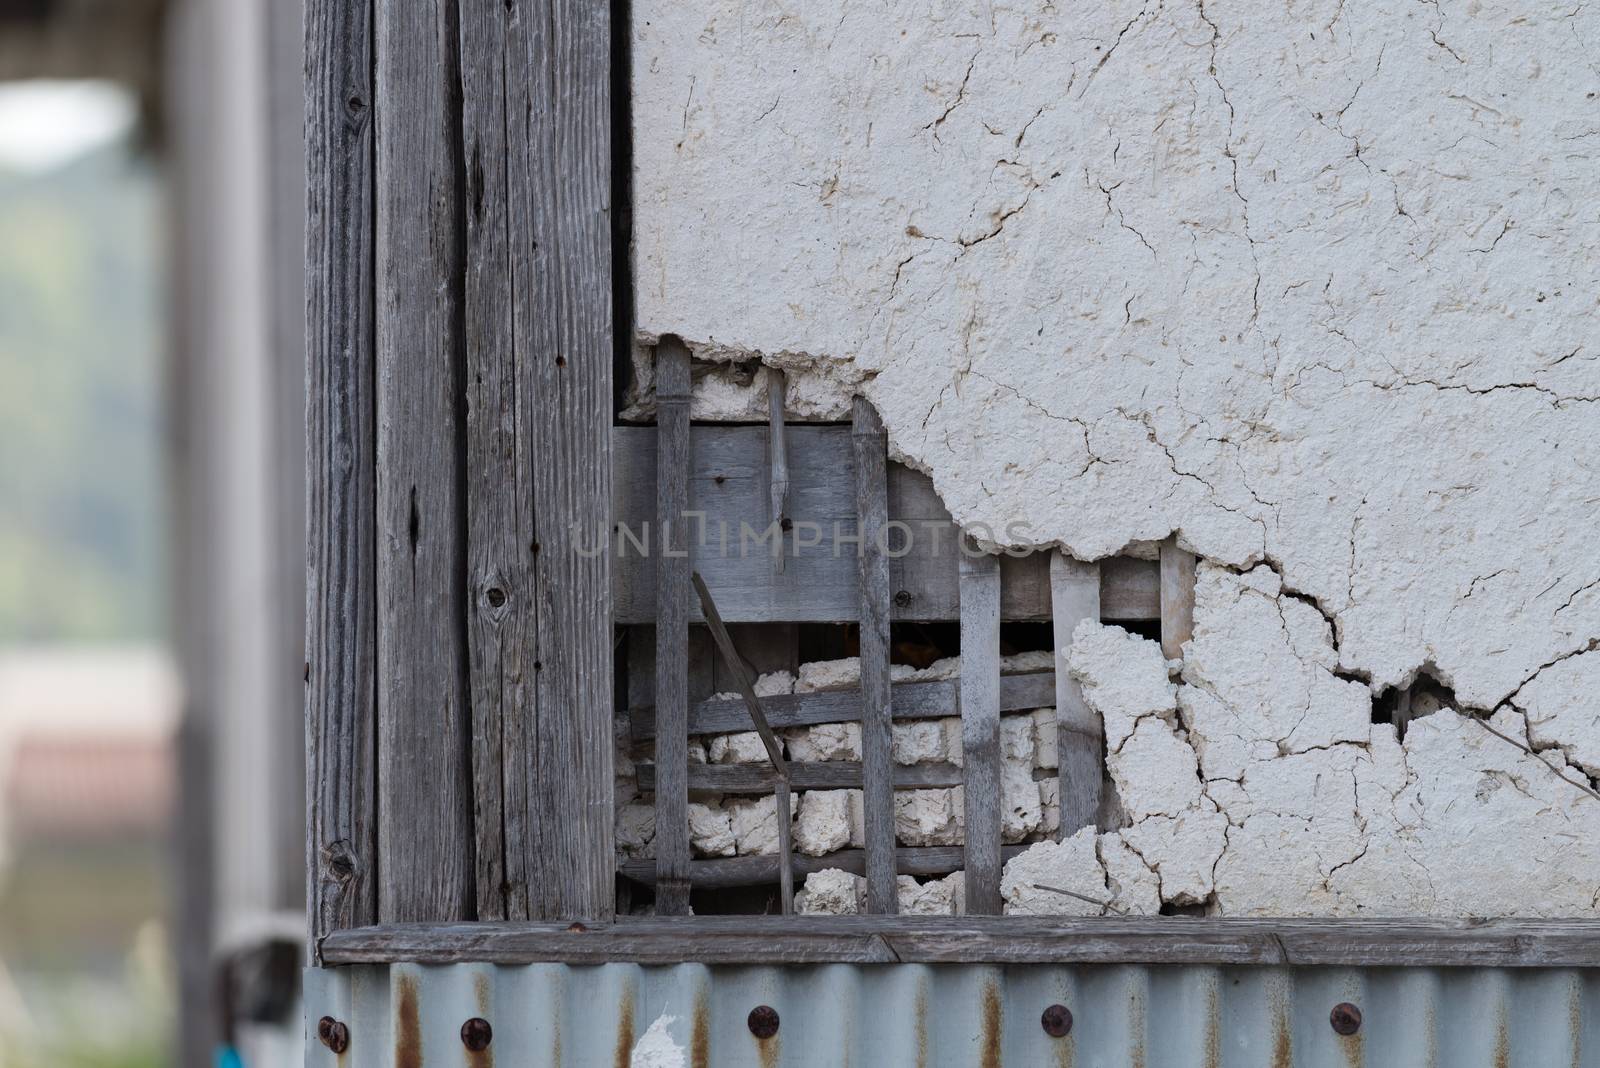 An outdoor old broken and cracked plaster wall with the wooden lattice behind showing through.